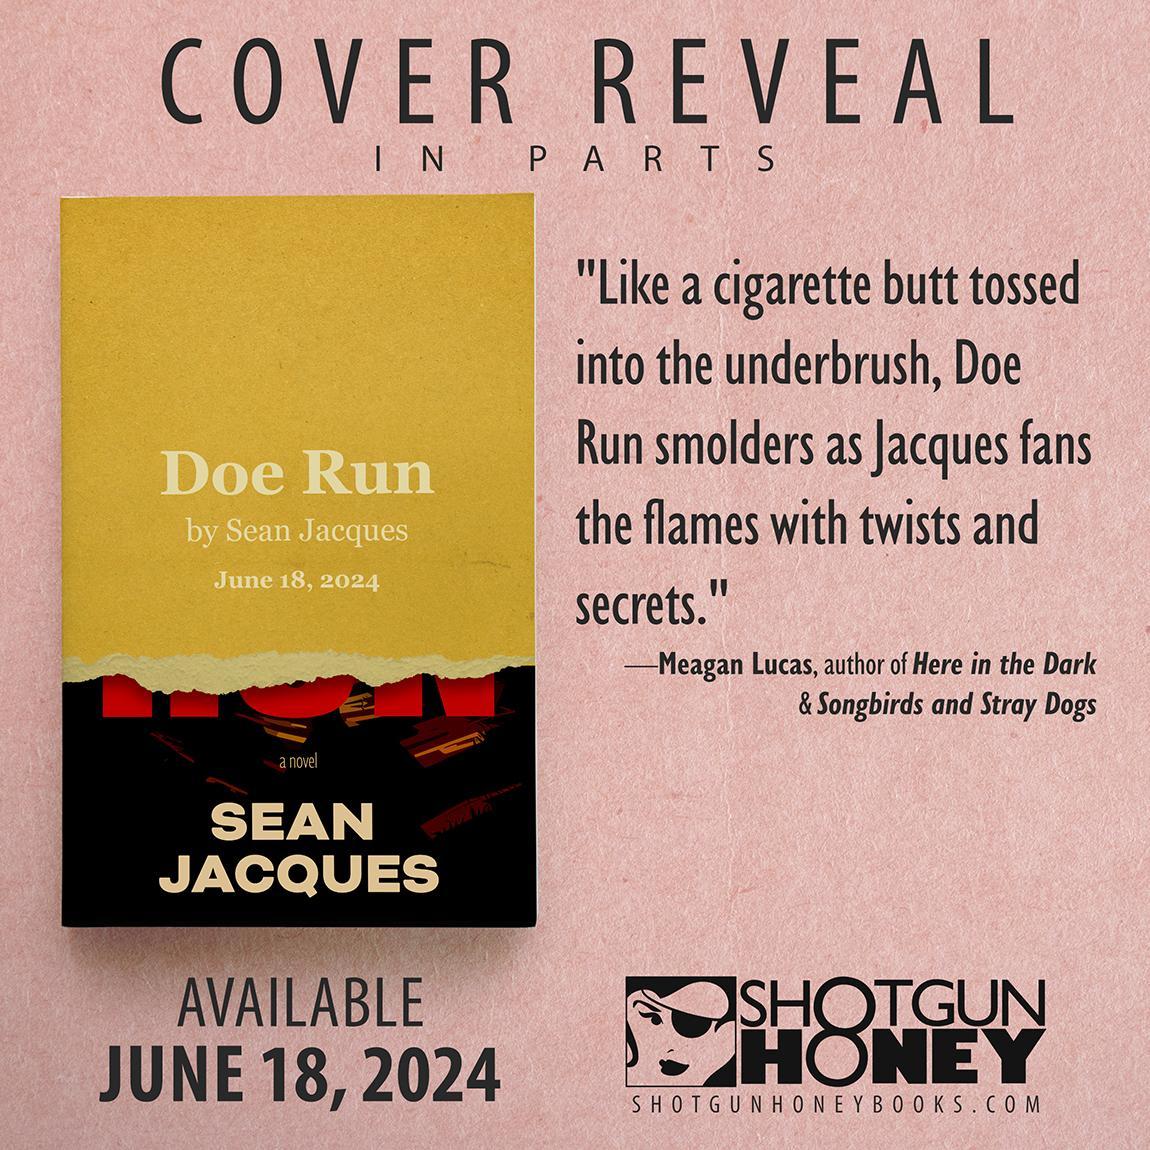 COVER REVEAL STRIP TEASE I've never done this before, but I had the pleasure of blurbing @seancjacques debut novel DOE RUN coming from @ShotgunHoney and now I get to show you a sexy little slice of the gorgeous cover by @RonEarl